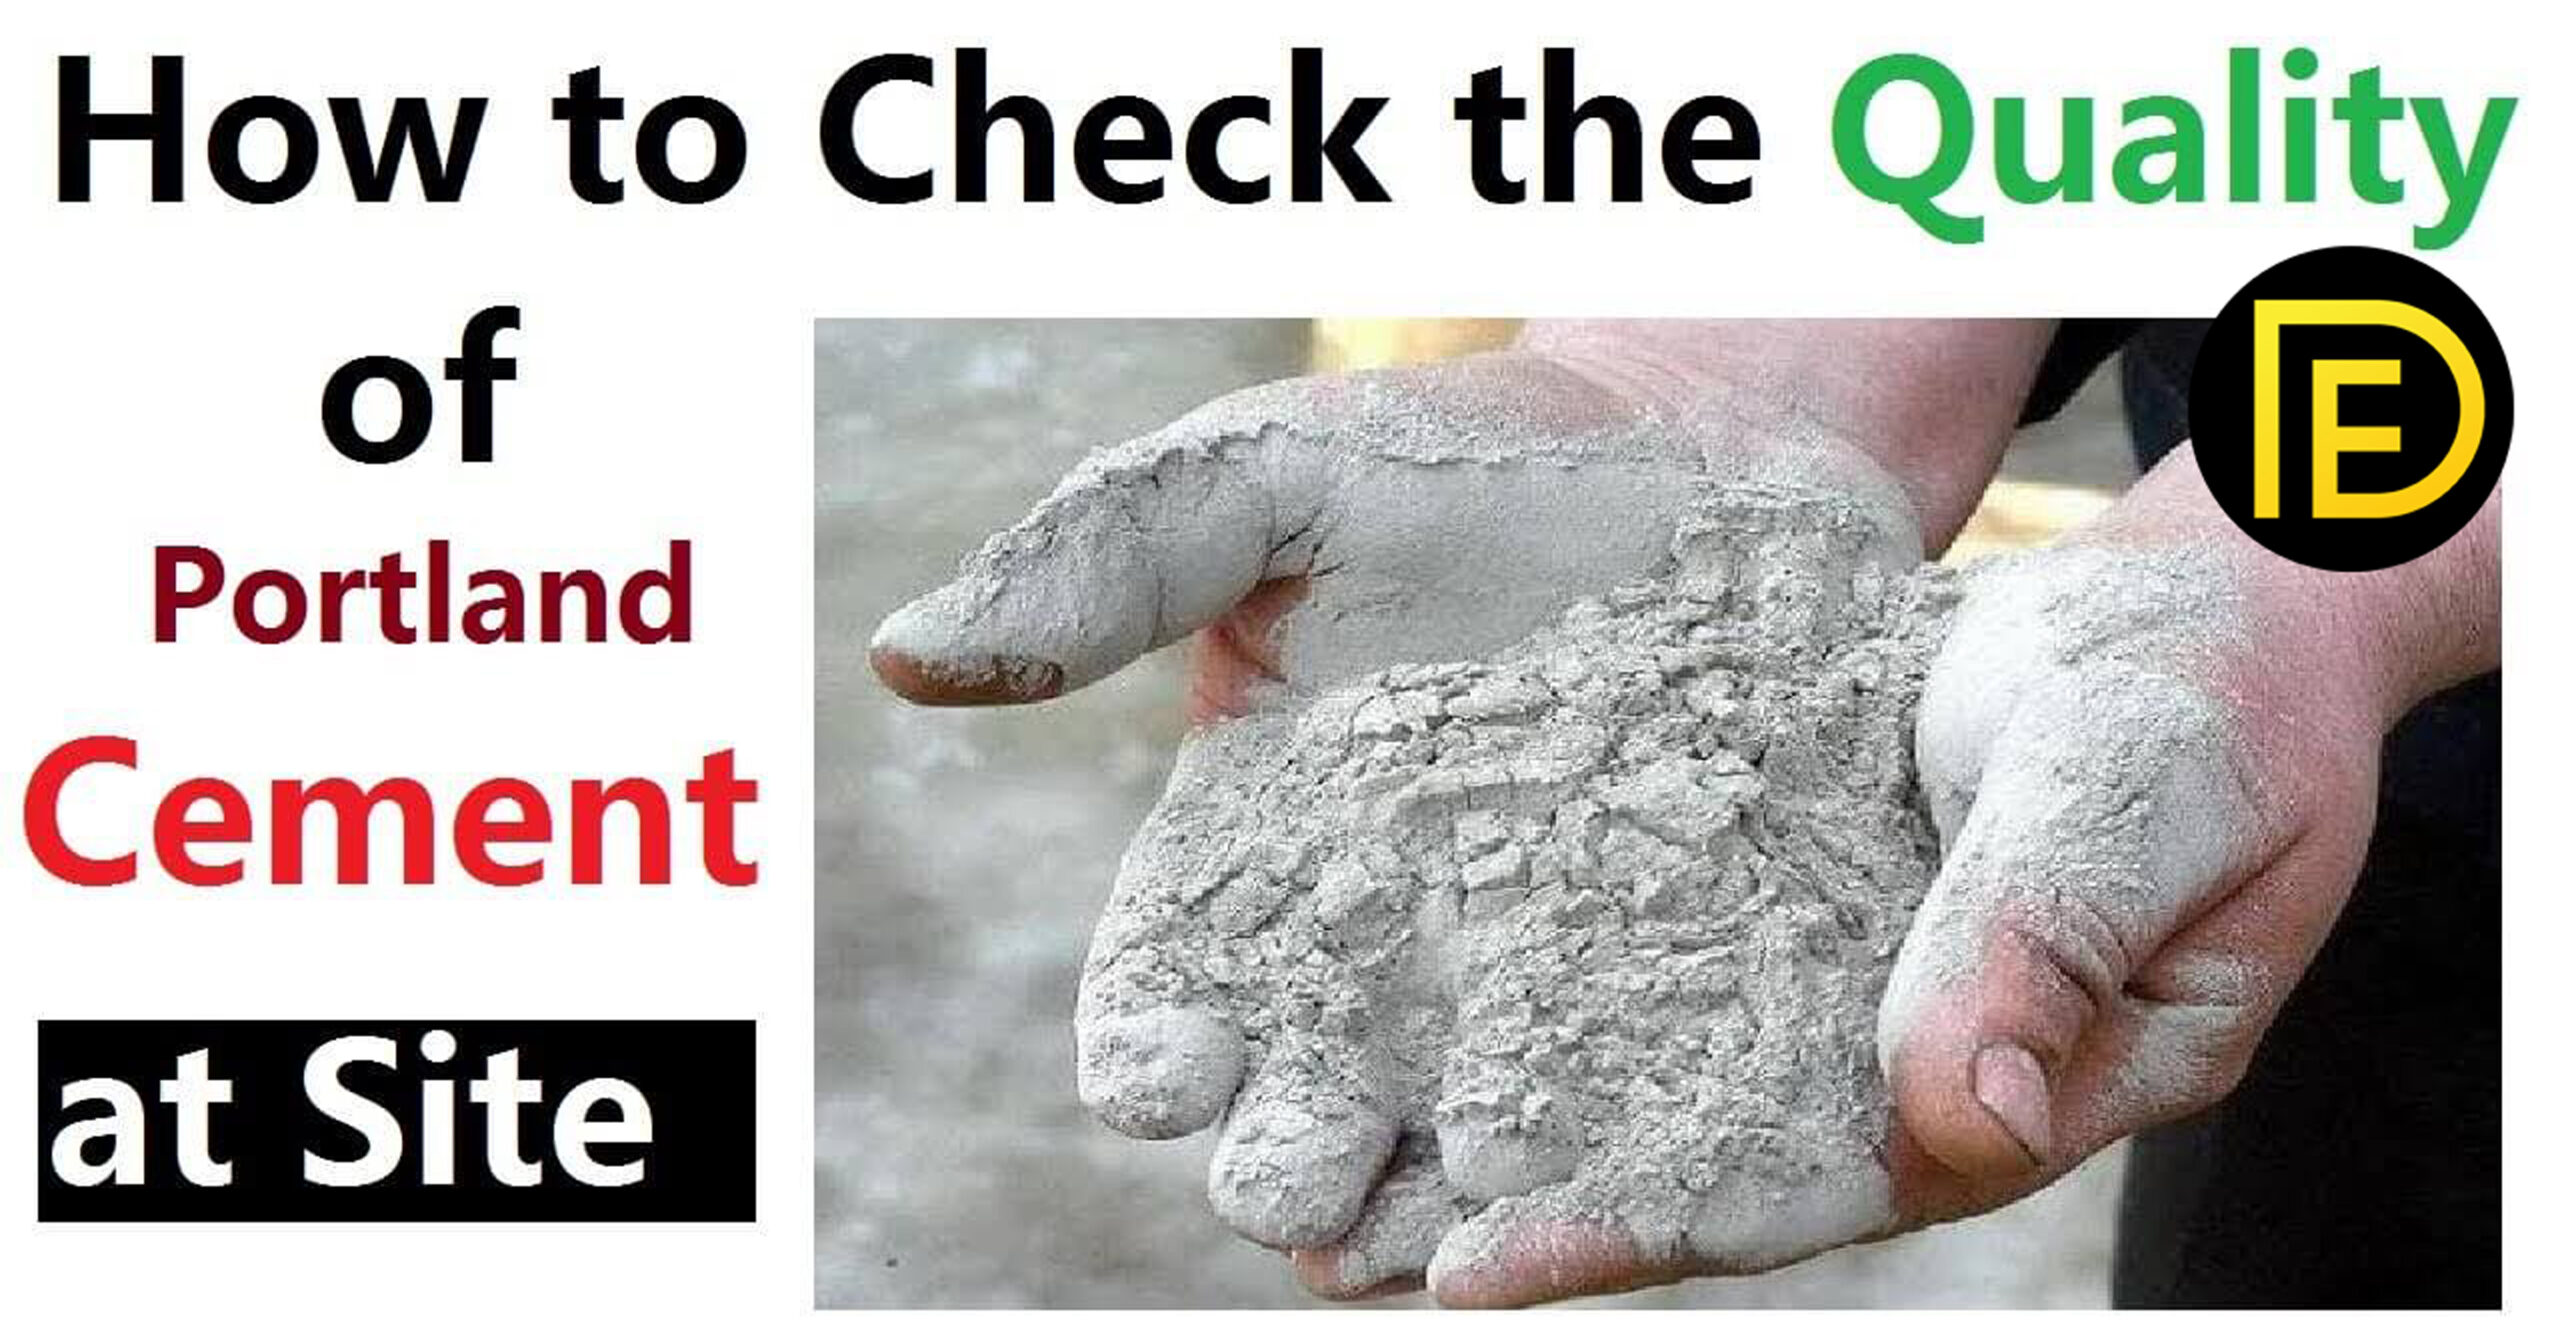 How To Check The Quality Of Portland Cement At Site - Daily Engineering